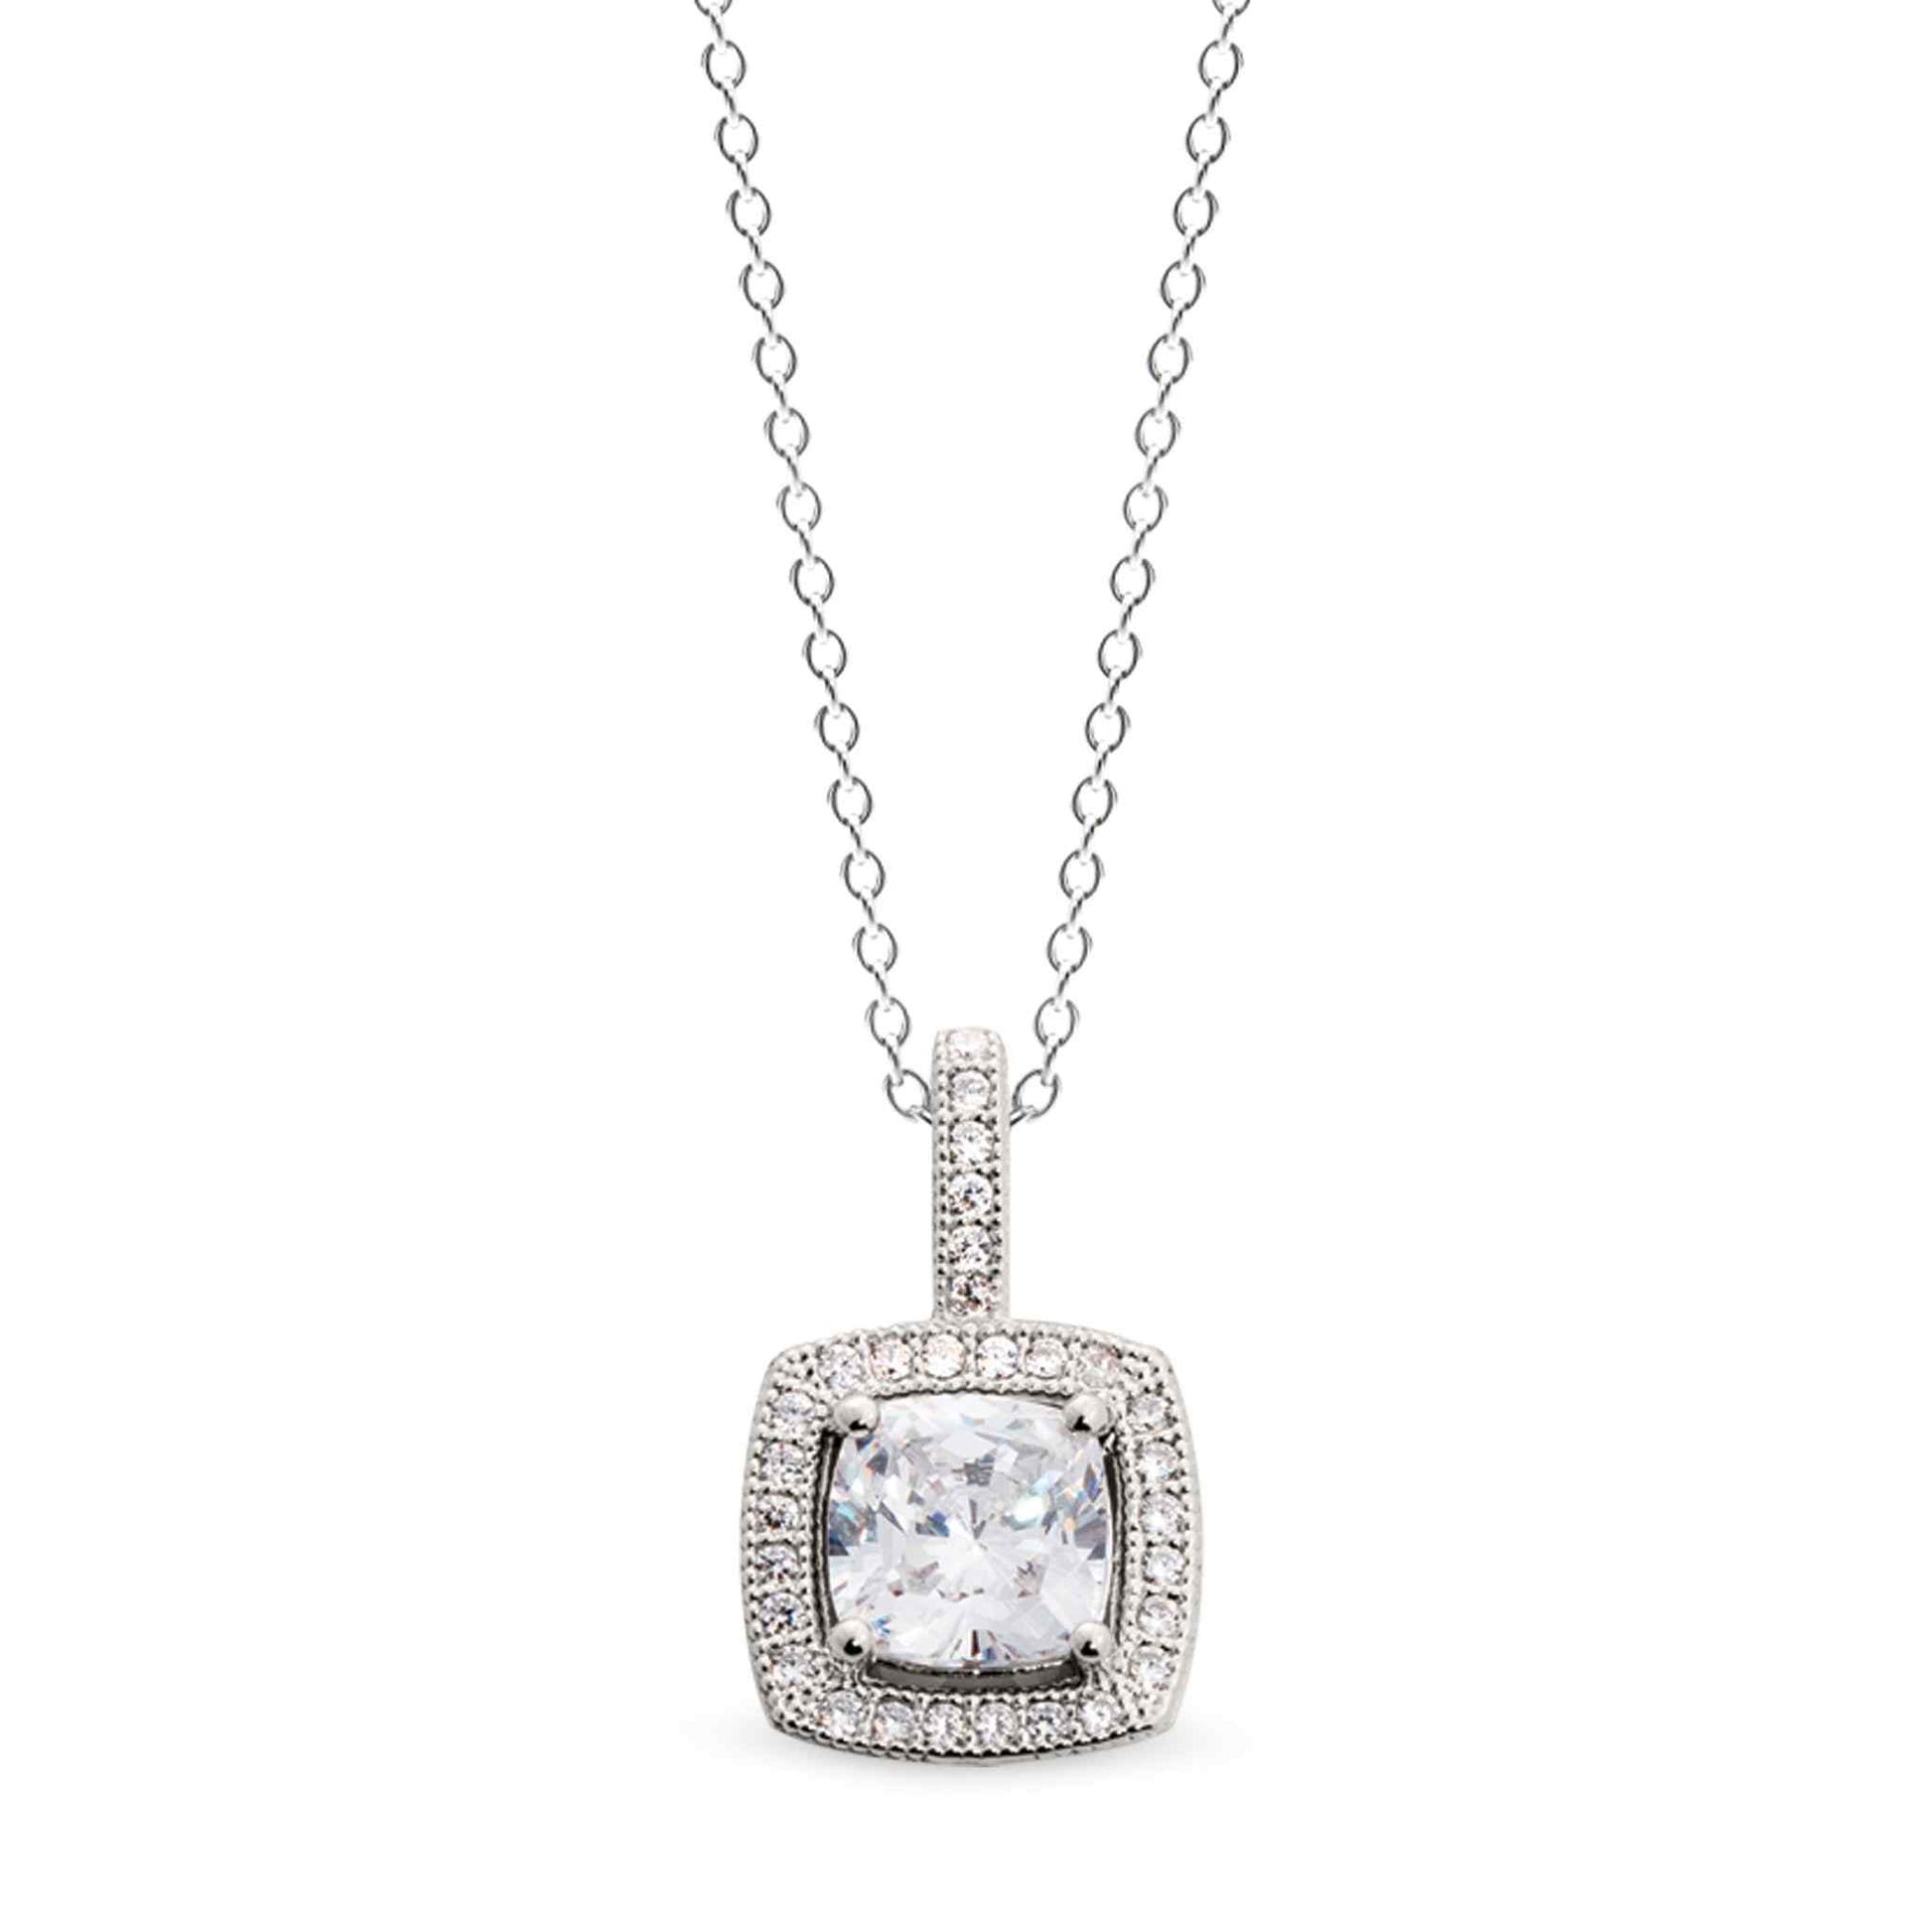 A cushion cut necklace with 30 simulated diamonds displayed on a neutral white background.